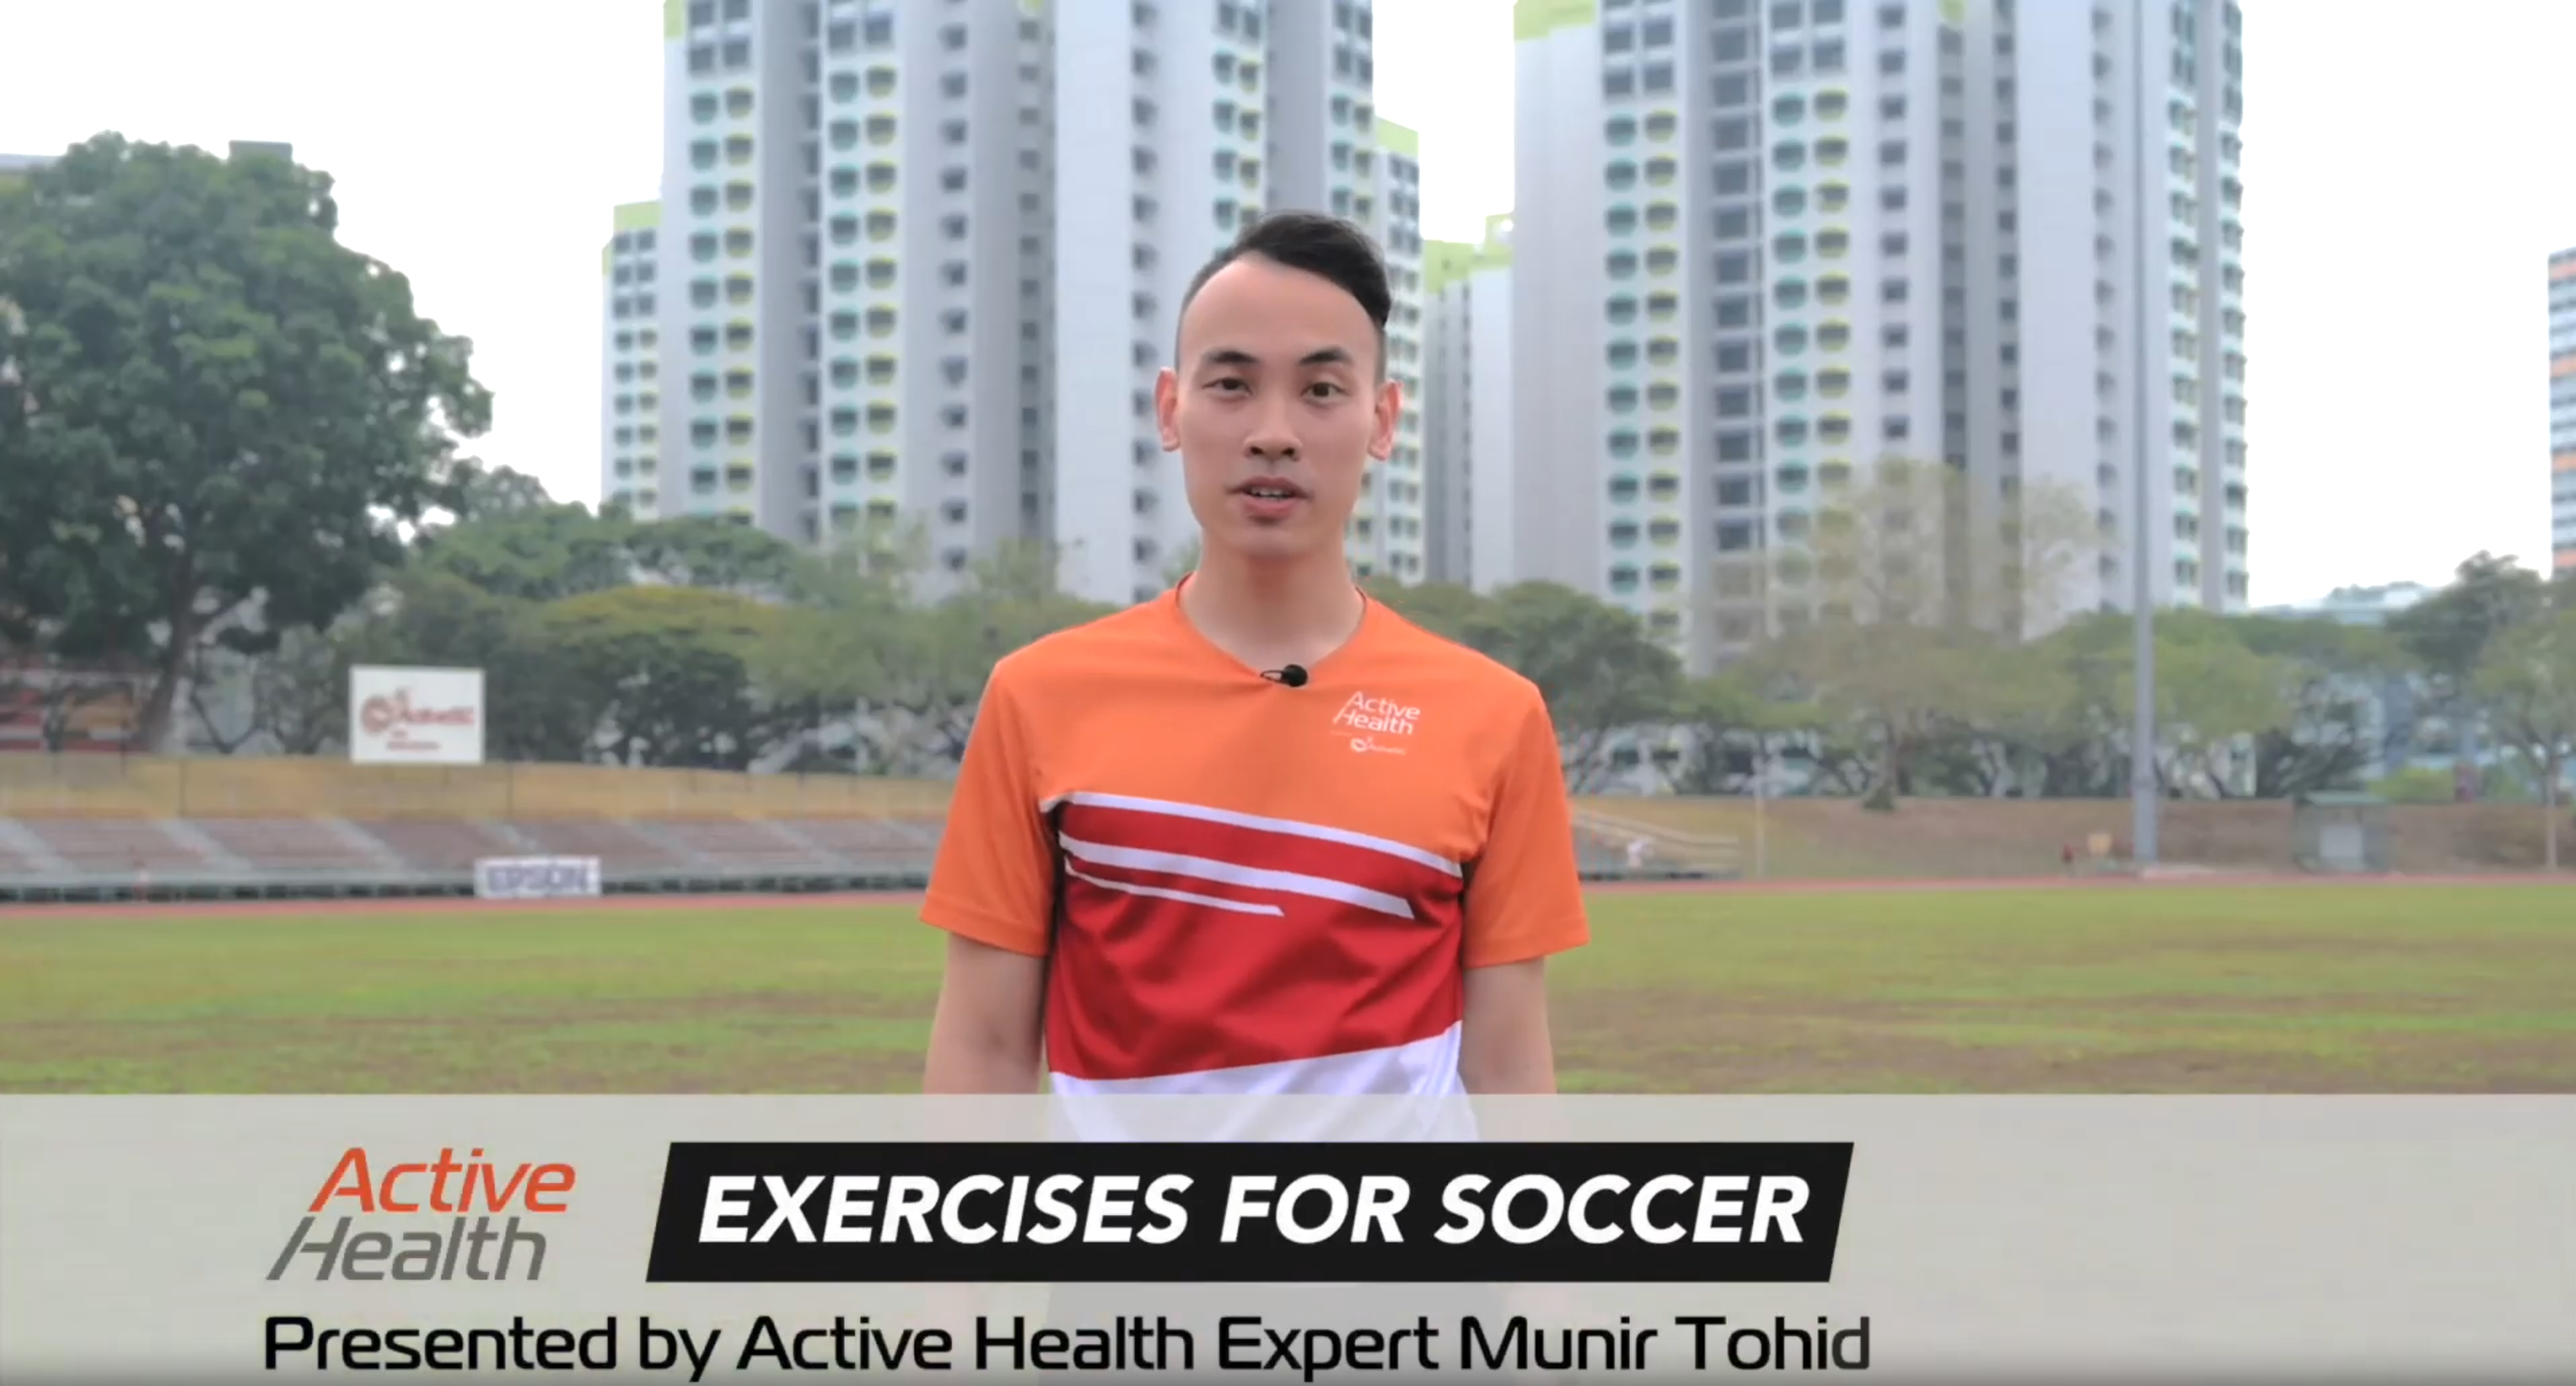 Ep 2 - 5 Simples Exercises To Improve Your Soccer Skills | Active Health